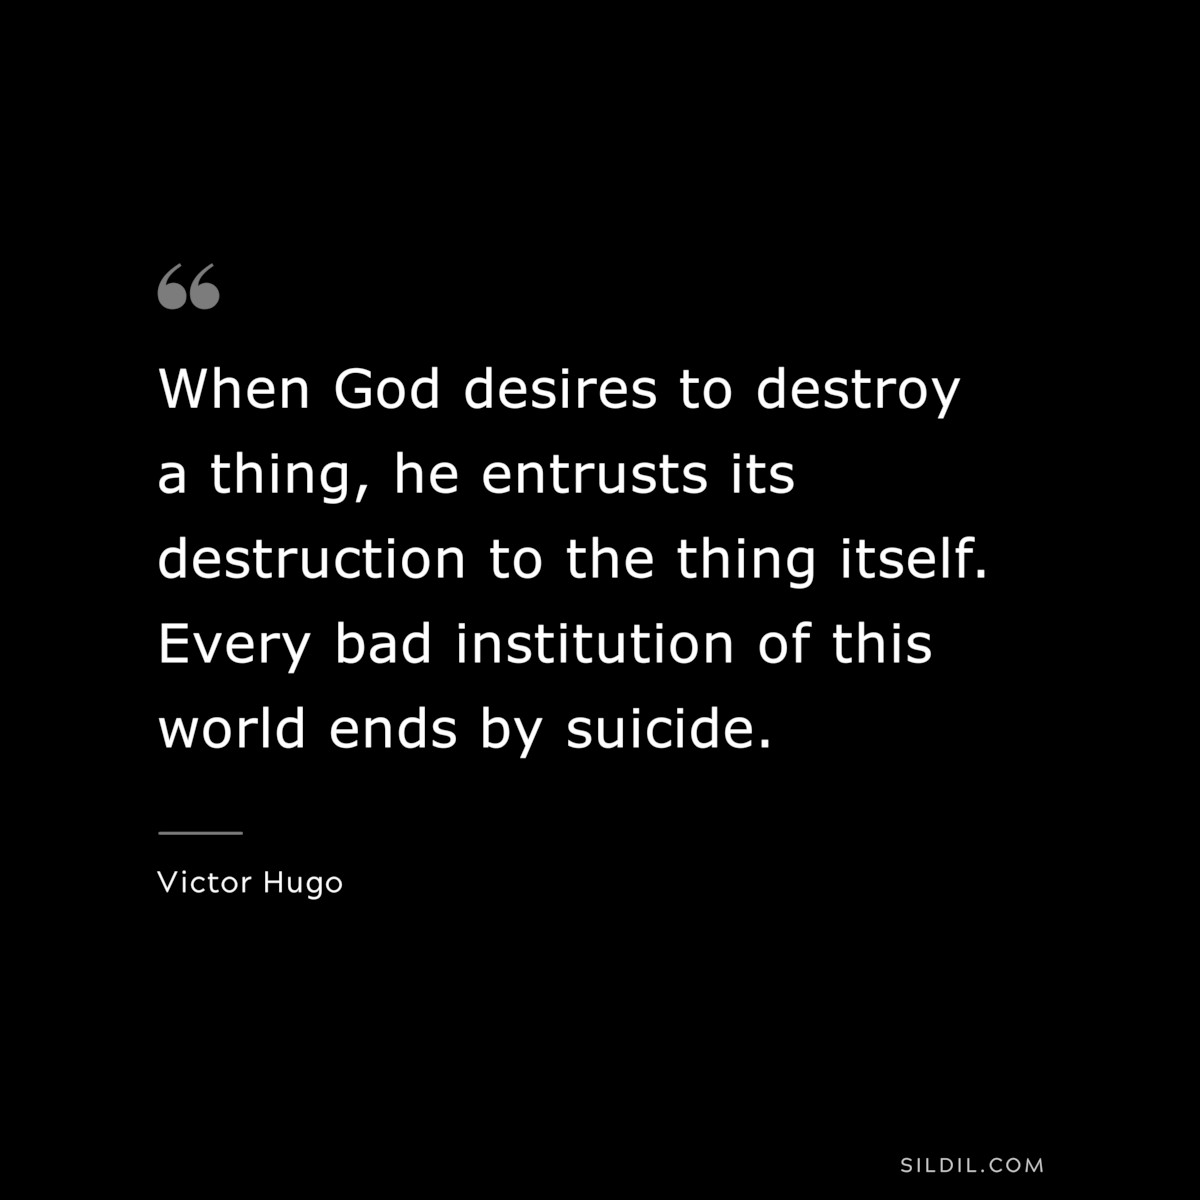 When God desires to destroy a thing, he entrusts its destruction to the thing itself. Every bad institution of this world ends by suicide.― Victor Hugo